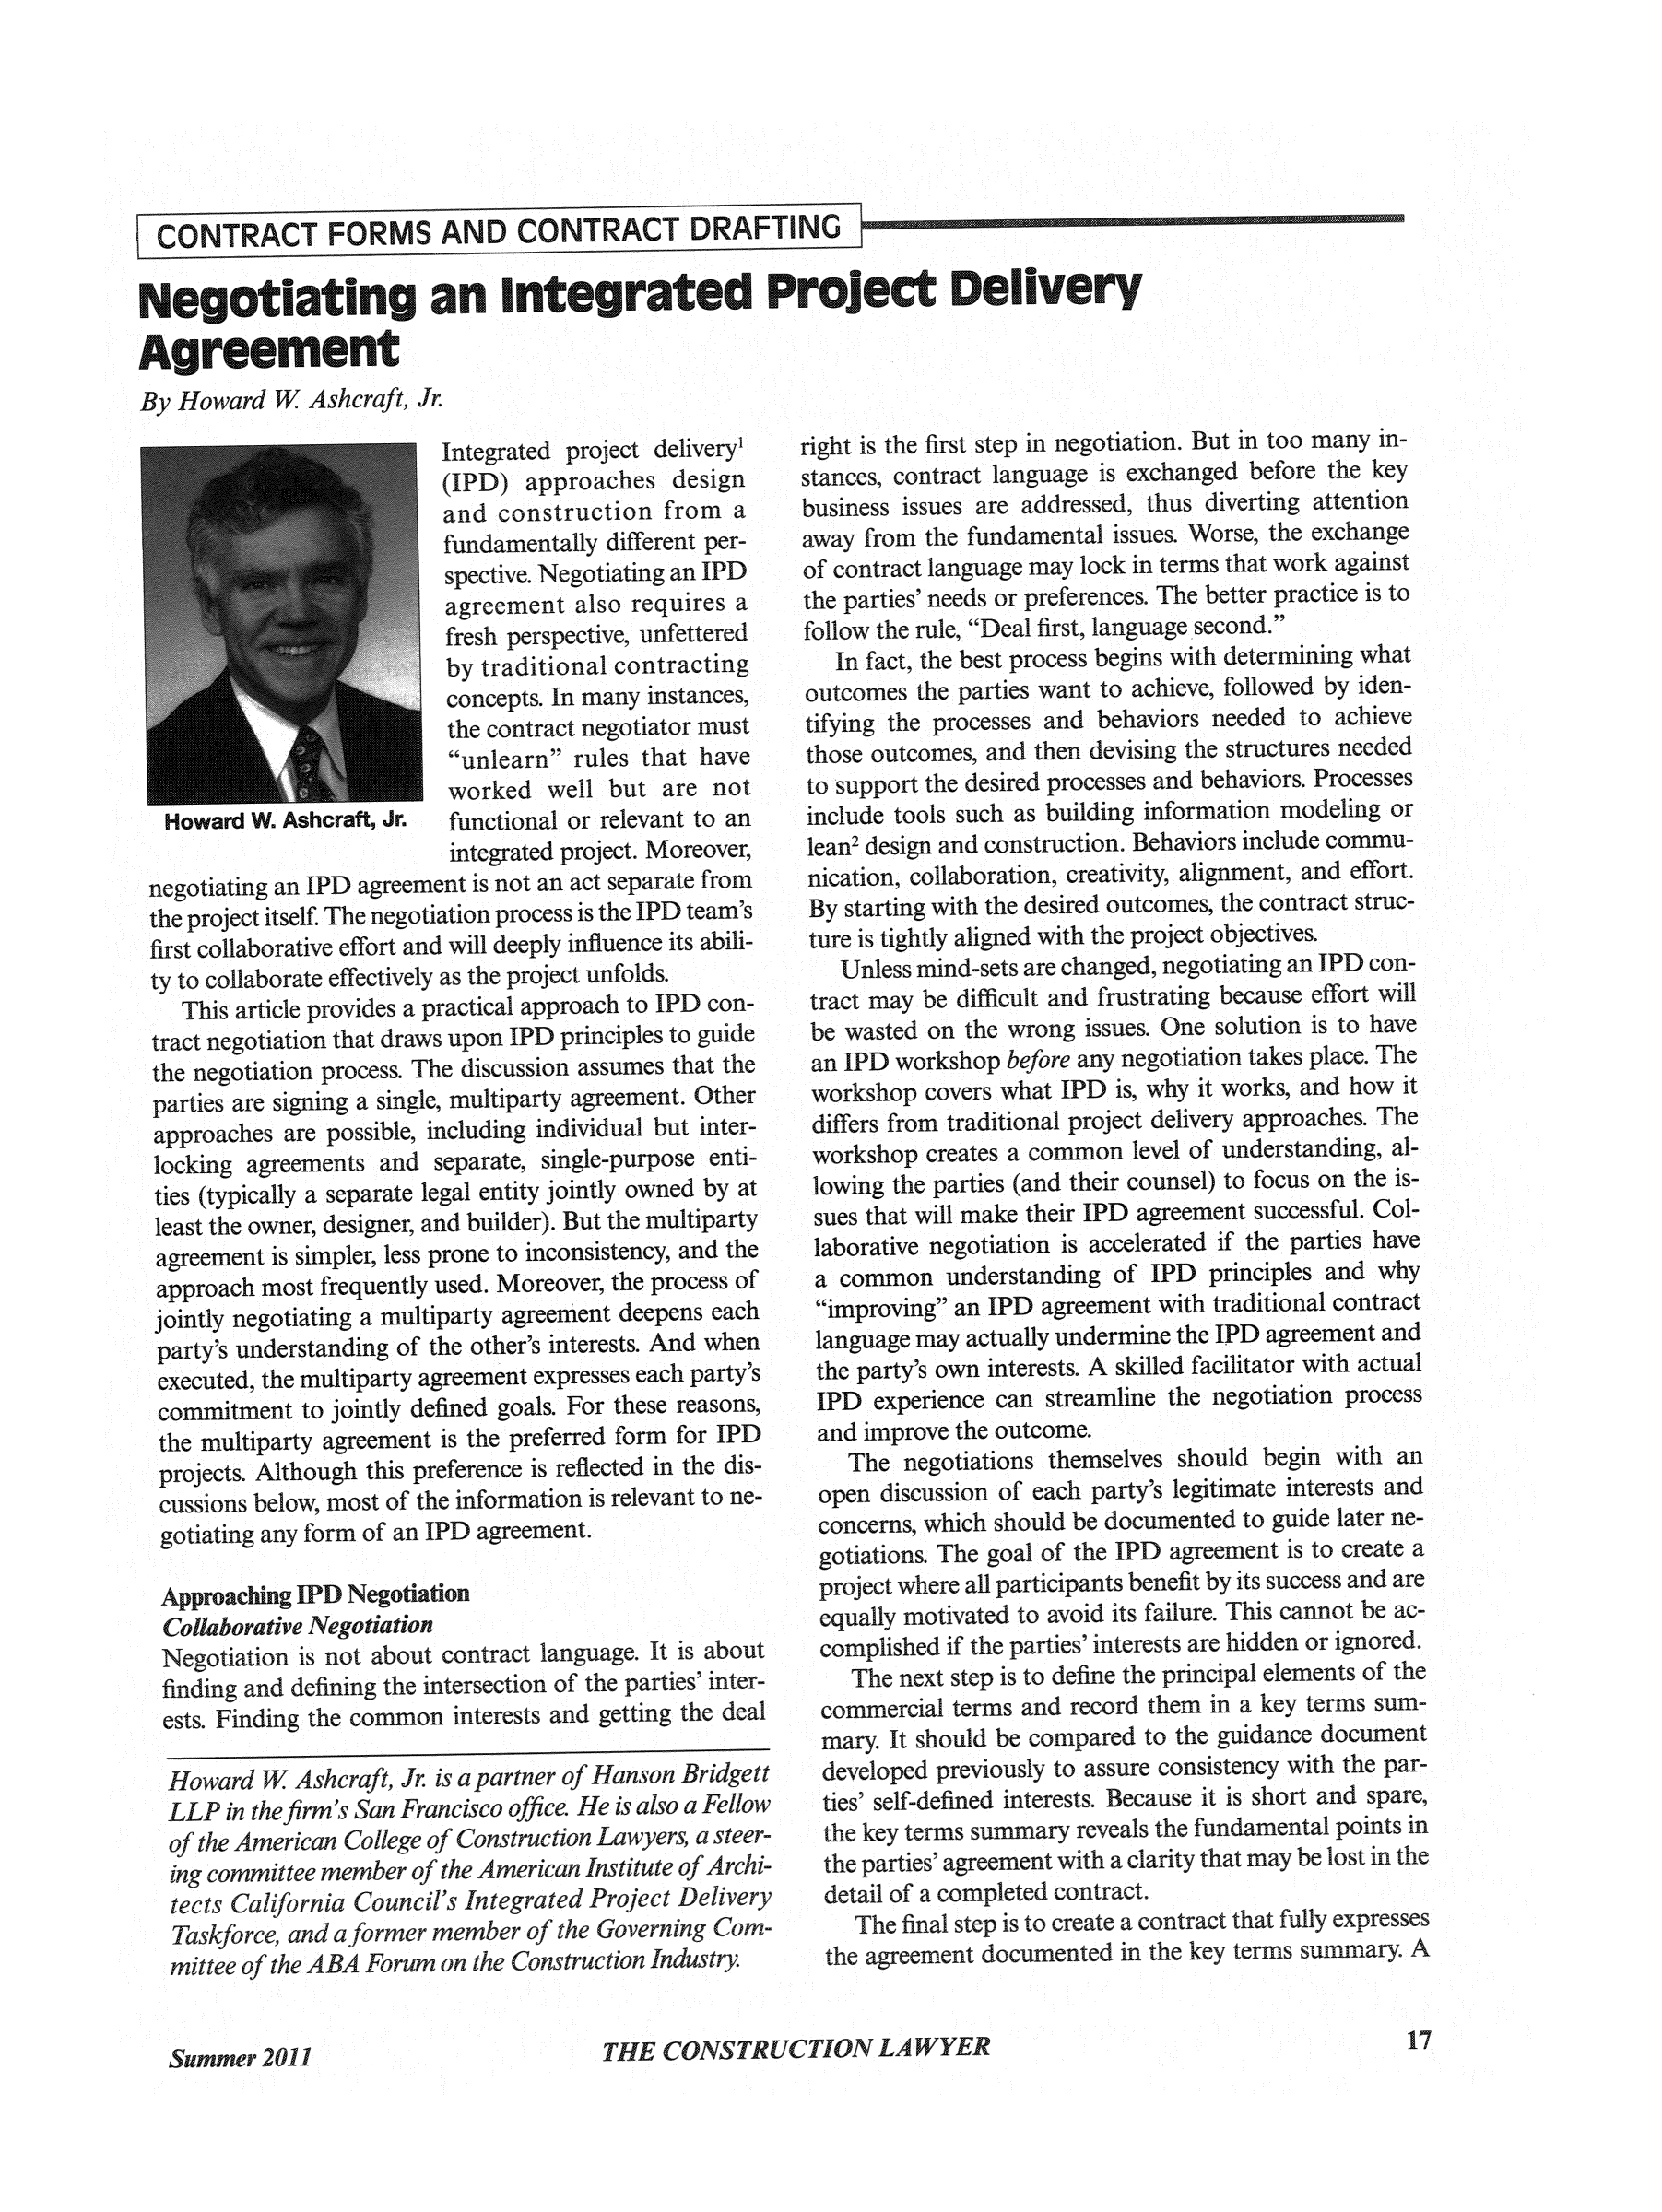 handle is hein.journals/conlaw31 and id is 121 raw text is: CONTRACT FORMS AND CONTRACT DRAFTING
Negotiating an integrated Project Delivery
Agreement
B v Hoilvard W. Ashera, A

Integrated project delivery
(IPD) approaches design
and construction from a
fundamentally different per-
spective. Negotiating an IPD
agreement also requires a
fresh perspective, unfettered
by traditional contracting
concepts. In many instances,
the contract negotiator must
unlearn rules that have
worked well but are not
Howard W. Ashcraft, Jr.  functional or relevant to an
integrated project. Moreover,
negotiating an IPD agreement is not an act separate from
the project itself. The negotiation process is the IPD team's
first collaborative effort and will deeply influence its abili-
ty to collaborate effectively as the project unfolds.
This article provides a practical approach to IPD con-
tract negotiation that draws upon IPD principles to guide
the negotiation process. Te discussion assumes that the
parties are signing a single, multiparty agreement. Other
approaches are possible, including individual but inter-
locking agreements and separate, singie-purpose enti-
ties (typically a separate legal entity jointly owned by at
least the owner, designer, and builder). But the multiparty
agreement is simpler, less prone to inconsistency, and the
approach most frequently used. Moreover, the process of
jointly negotiating a multiparty agreement deepens each
party's understanding of the other's interests. And when
executed, the multiparty agreement expresses each party's
com itment to jointly defined goals. For these reasons,
the multiparty agreement is the preferred form for IPD
projects. Although this preference is reflected in the dis-
cussions below most of the information is relevant to ne-
gotating any form of an IPD agreement.
AproachnIP    Negotiation
Collaborative Negotiation
Negotiation is not about contract language. It is about
fiding and defining the intersection of the parties' inter-
ests. Finding the common interests and getting the deal
Howard W Ashcraft, Jr. is a partner of Hanson Bridgett
LLP in the firm's San Francisco office. He is also a Fellow
of the American College of Construction Lawyers, a steer-
ing committee memer of the American Institute ofArchi-
tects California Council's Integrated Project Delivery
Taskforce, and aiformer member of the Governing Com-
mittee of the AA Fom on the Construction Industry

right is the first step in negotiation. But in too many in-
stances, contract language is exchanged before the key
business issues are addressed, thus diverting attention
away from the fundamental issues. Worse, the exchange
of contract language may lock in terms that work against
the parties' needs or preferences. The better practice is to
follow the rule, Deal first, language second.
In fact, the best process begins with determining what
outcomes the parties want to achieve, followed by iden-
tifying the processes and behaviors needed to achieve
those outcomes, and then devising the structures needed
to support the desired processes and behaviors. Processes
include tools such as building information modeling or
lean2 design and construction. Behaviors include commu-
nication, collaboration, creativity, alignment, and effort.
By starting with the desired outcomes, the contract struc-
ture is tightly aligned with the project objectives.
Unless mind-sets are changed, negotiating an IPD con-
tract may be difficult and frustrating because effort will
be wasted on the wrong issues. One solution is to have
an IPD workshop before any negotiation takes place. The
workshop covers what IPD is, why it works, and how it
differs from traditional project delivery approaches. The
workshop creates a common level of understanding, al-
lowing the parties (and their counsel) to focus on the is-
sues that will make their IPD agreement successful. Col-
laborative negotiation is accelerated if the parties have
a common understanding of IPD principles and why
improving an IPD agreement with traditional contract
language may actually undermine the IPD agreement and
the party's own interests. A skilled facilitator with actual
IPD experience can streamline the negotiation process
and improve the outcome.
The negotiations themselves should begin with an
open discussion of each party's legitimate interests and
concerns, which should be documented to guide later ne-
gotiations. The goal of the IPD agreement is to create a
project where all participants benefit by its success and are
equally motivated to avoid its failure. This cannot be ac-
complished if the parties' interests are hidden or ignored.
The next step is to define the principal elements of the
commercial terms and record them in a key terms sum-
mary. It should be compared to the guidance document
developed previously to assure consistency with the par-
ties' self-defined interests. Because it is short and spare,
the key terms sumary reveals the fundamental points in
the parties' agreement with a clarity that may be lost in the
detail of a completed contract.
The final step is to create a contract that fully expresses
the agreement documented in the key terms sumary. A

17


